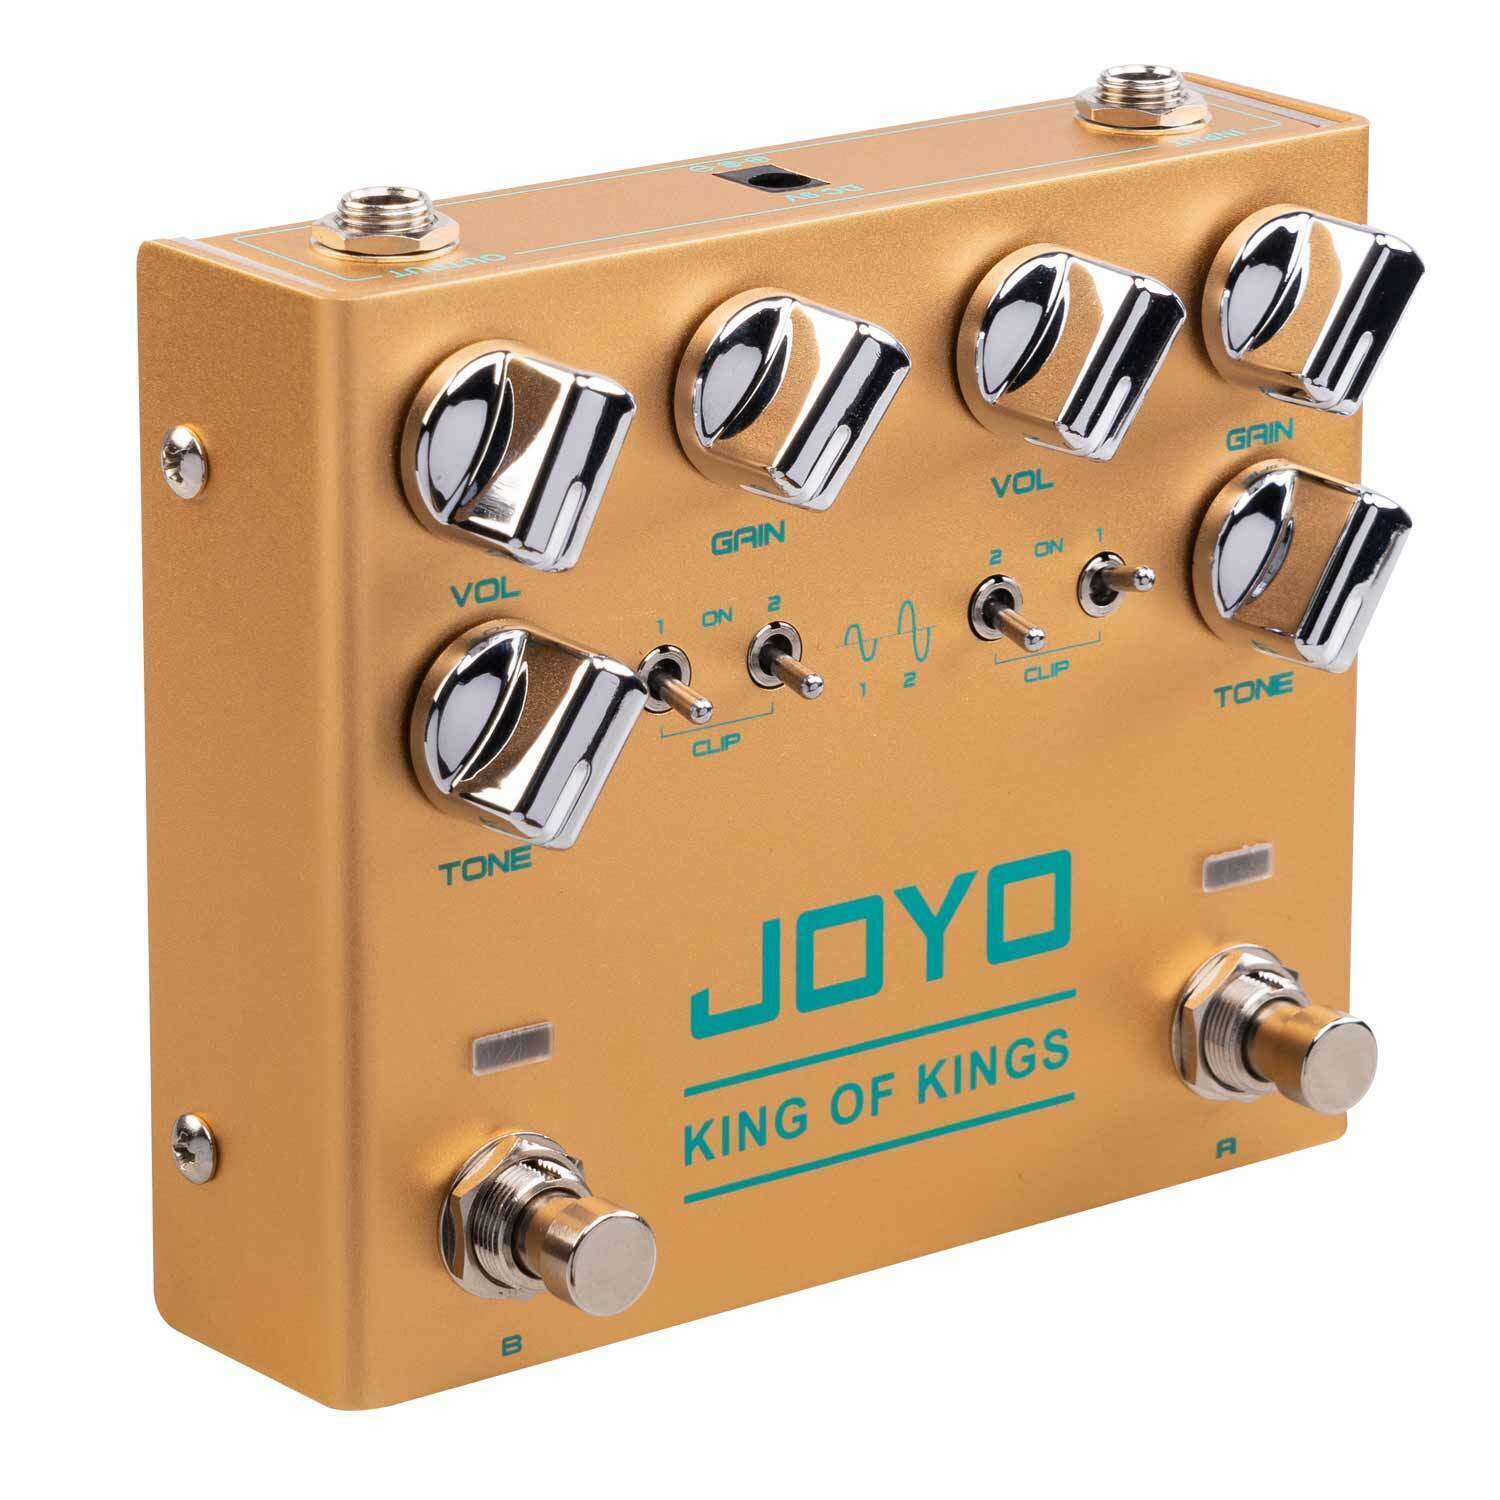 Joyo R20 Revolution Series King of Kings Overdrive Guitar Effects Pedal